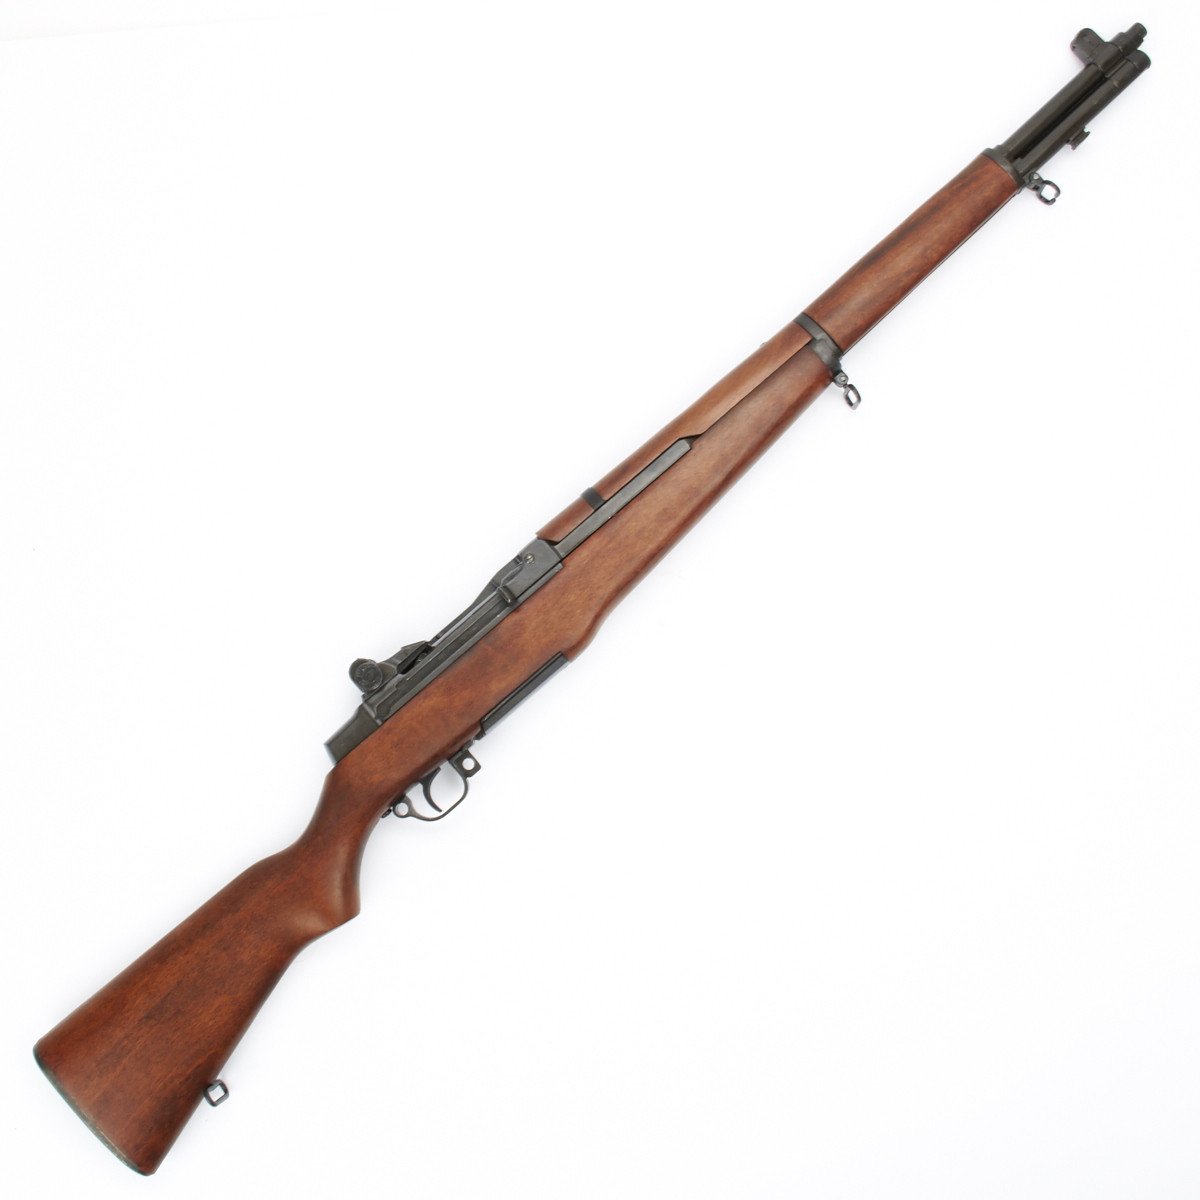 How Garand's Rifle Became the M1